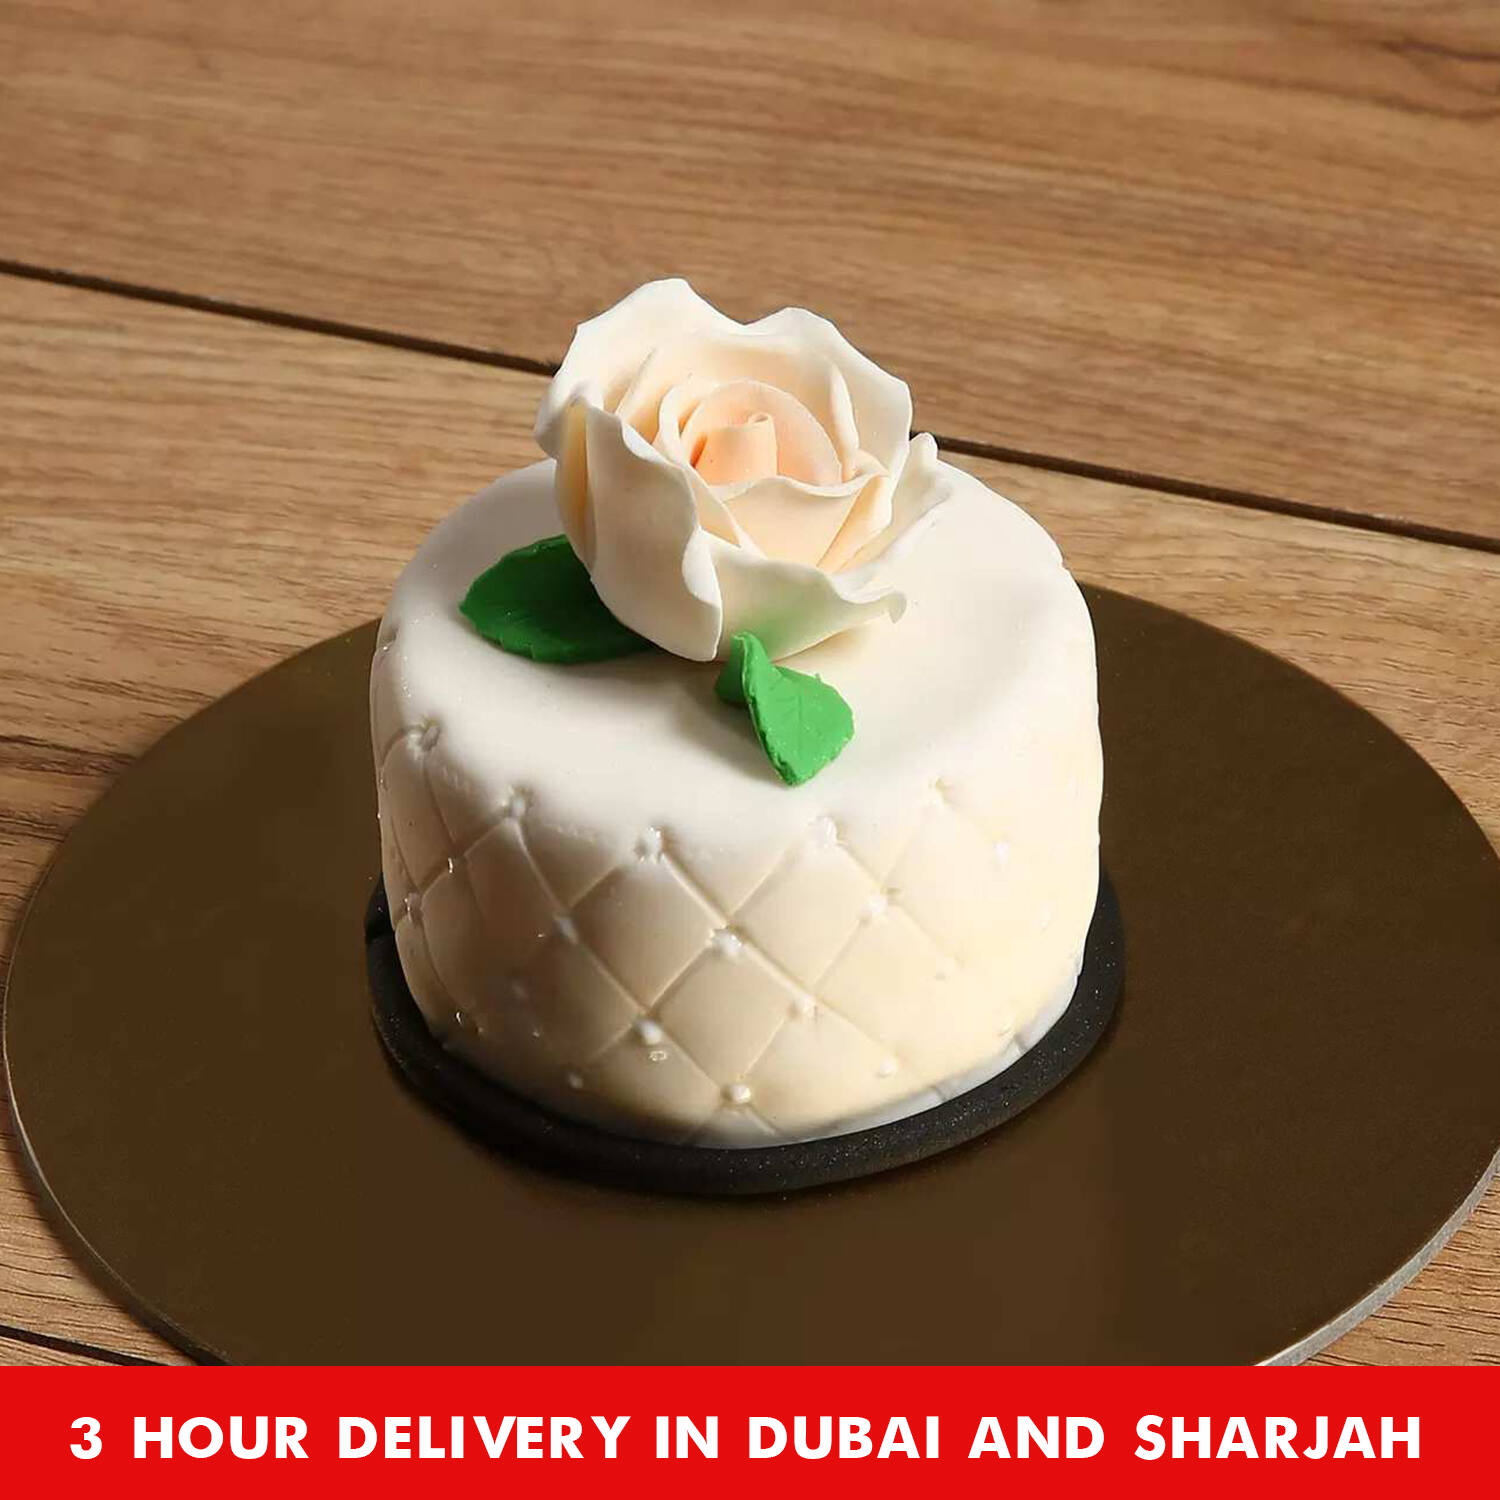 Send Cakes to UAE, Cake Delivery UAE - FNP